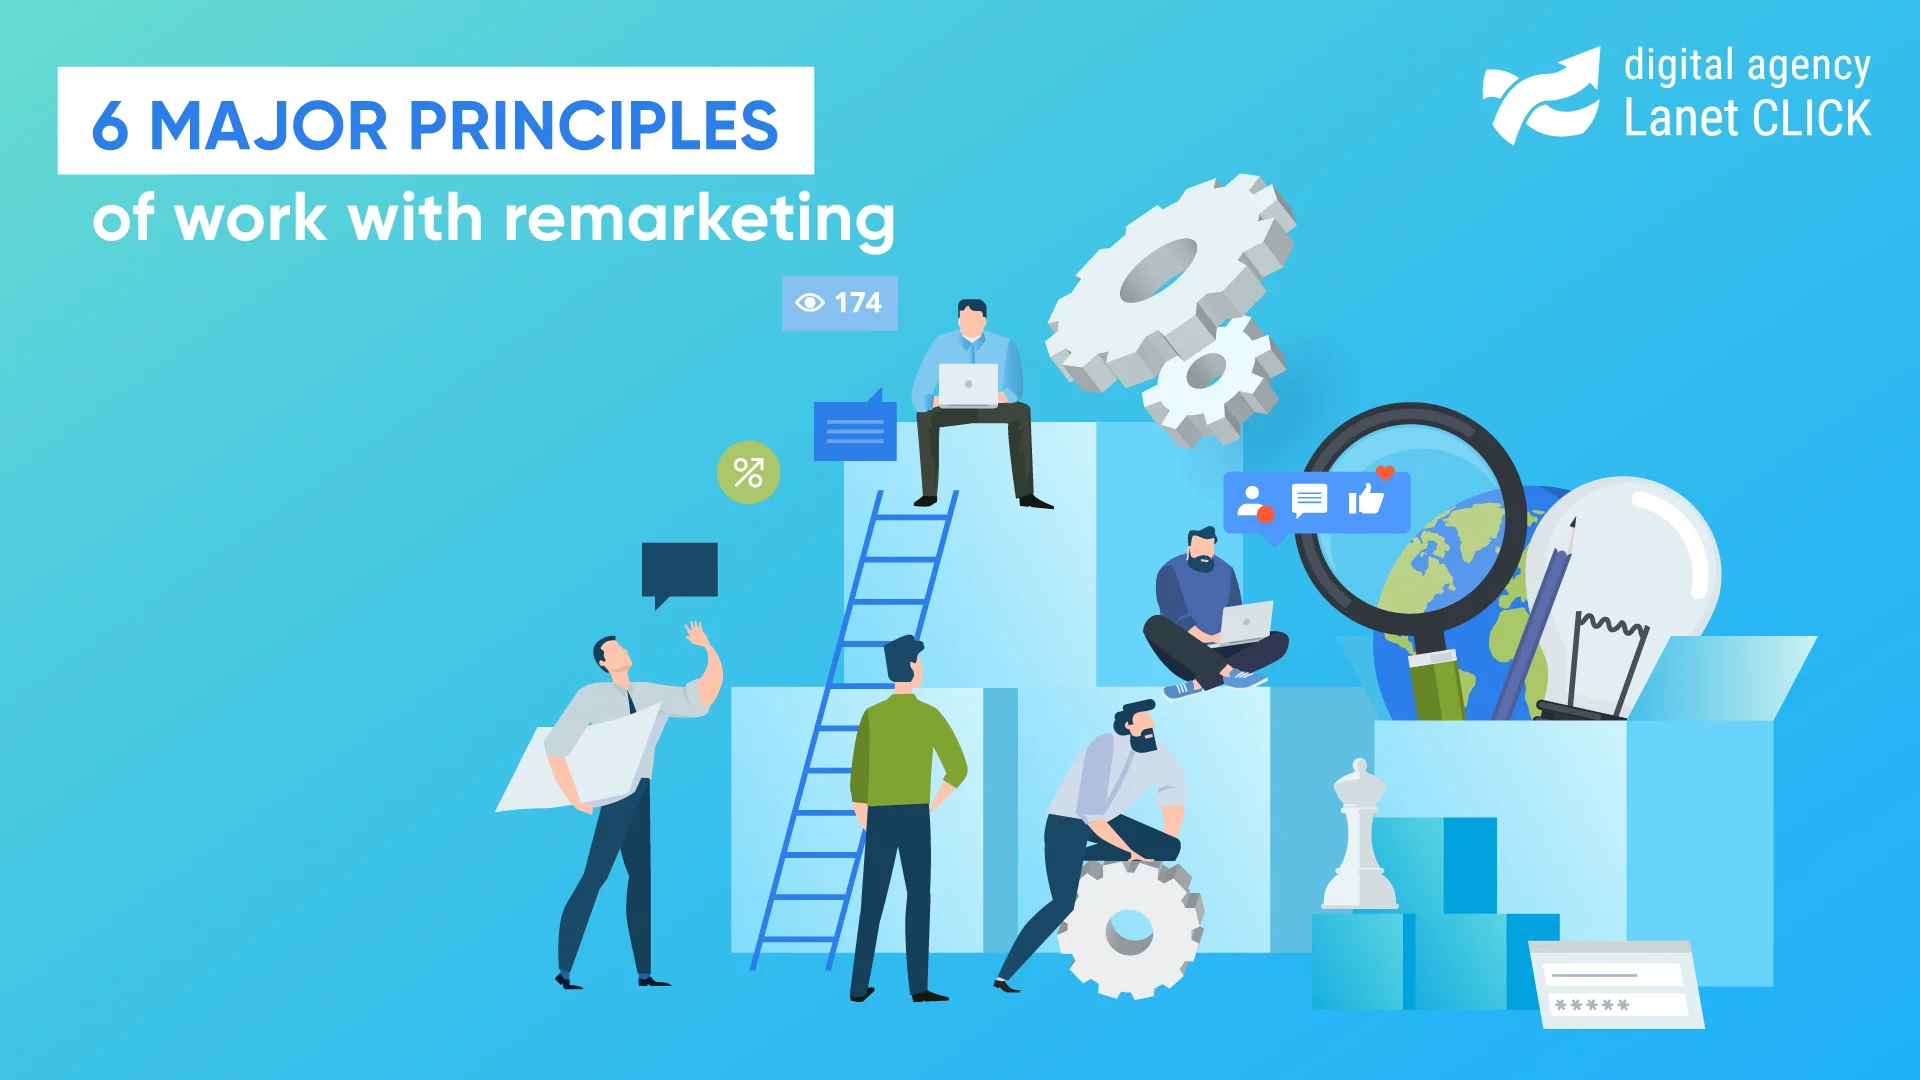 6 major principles of work with remarketing